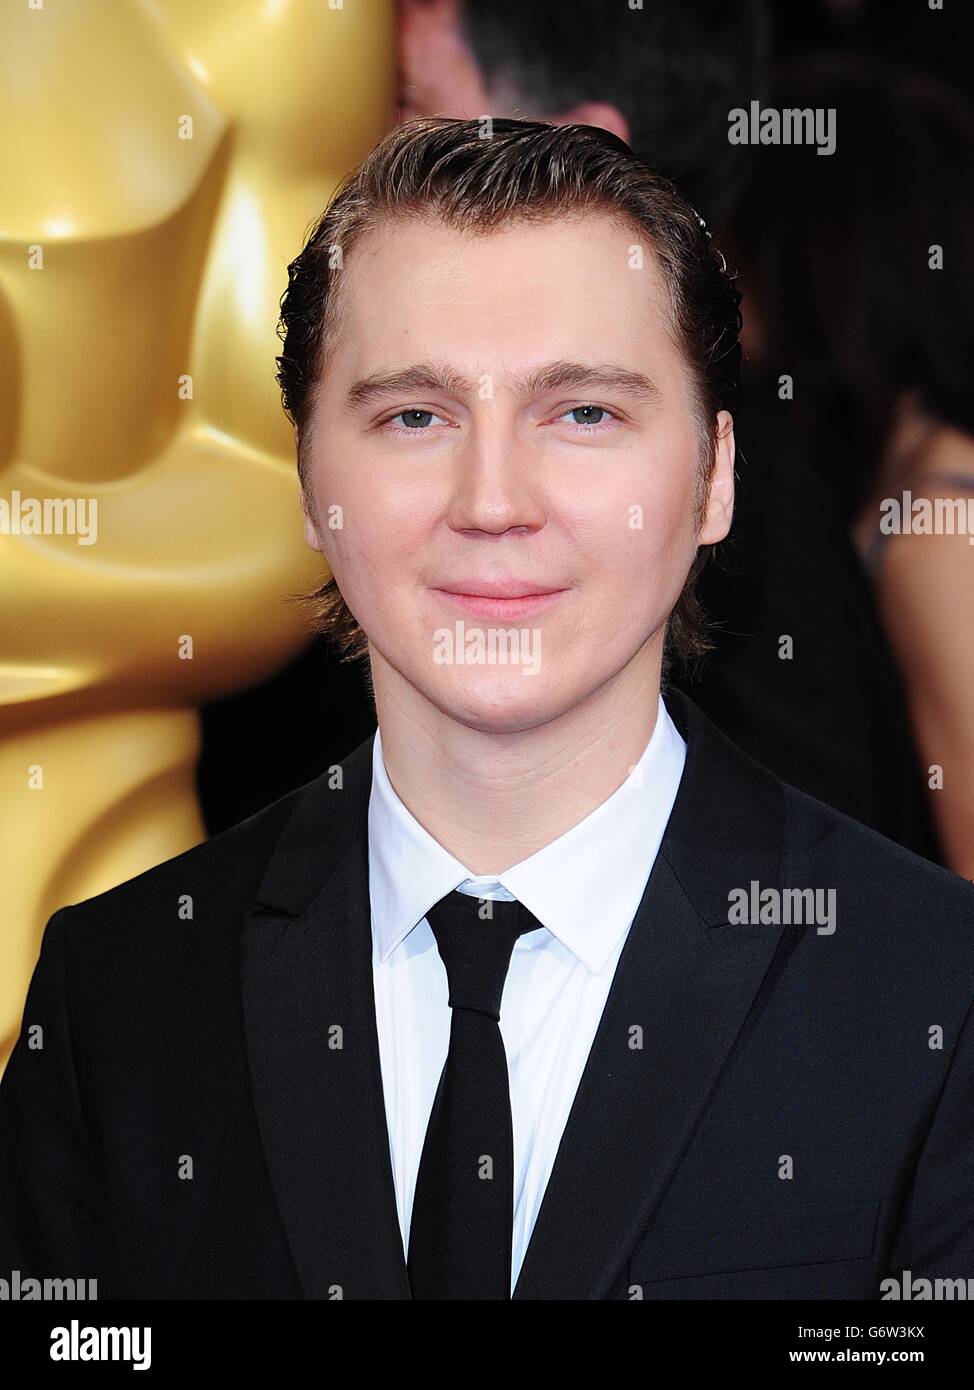 Paul Dano arriving at the 86th Academy Awards held at the Dolby Theatre in Hollywood, Los Angeles, CA, USA, March 2, 2014. Stock Photo